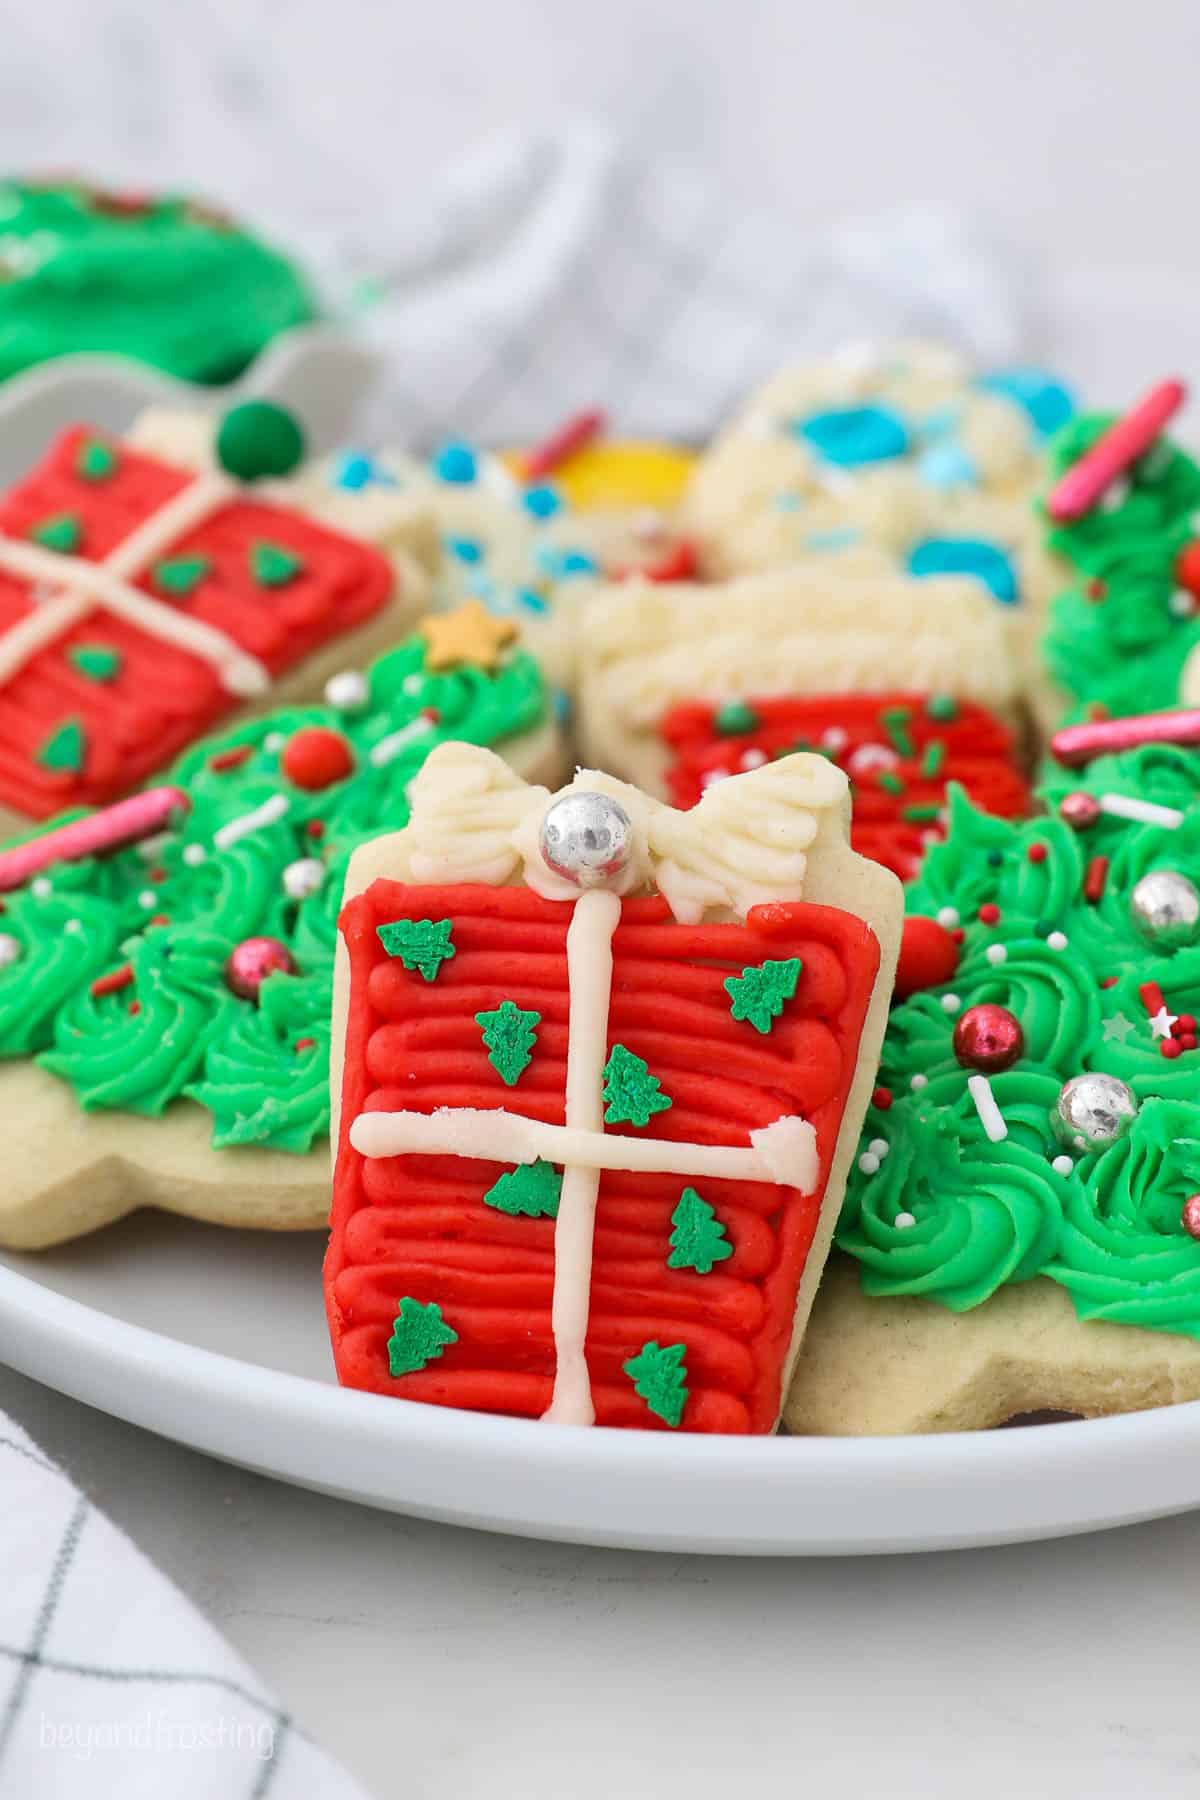 A decorated present Christmas cookie with red and white buttercream